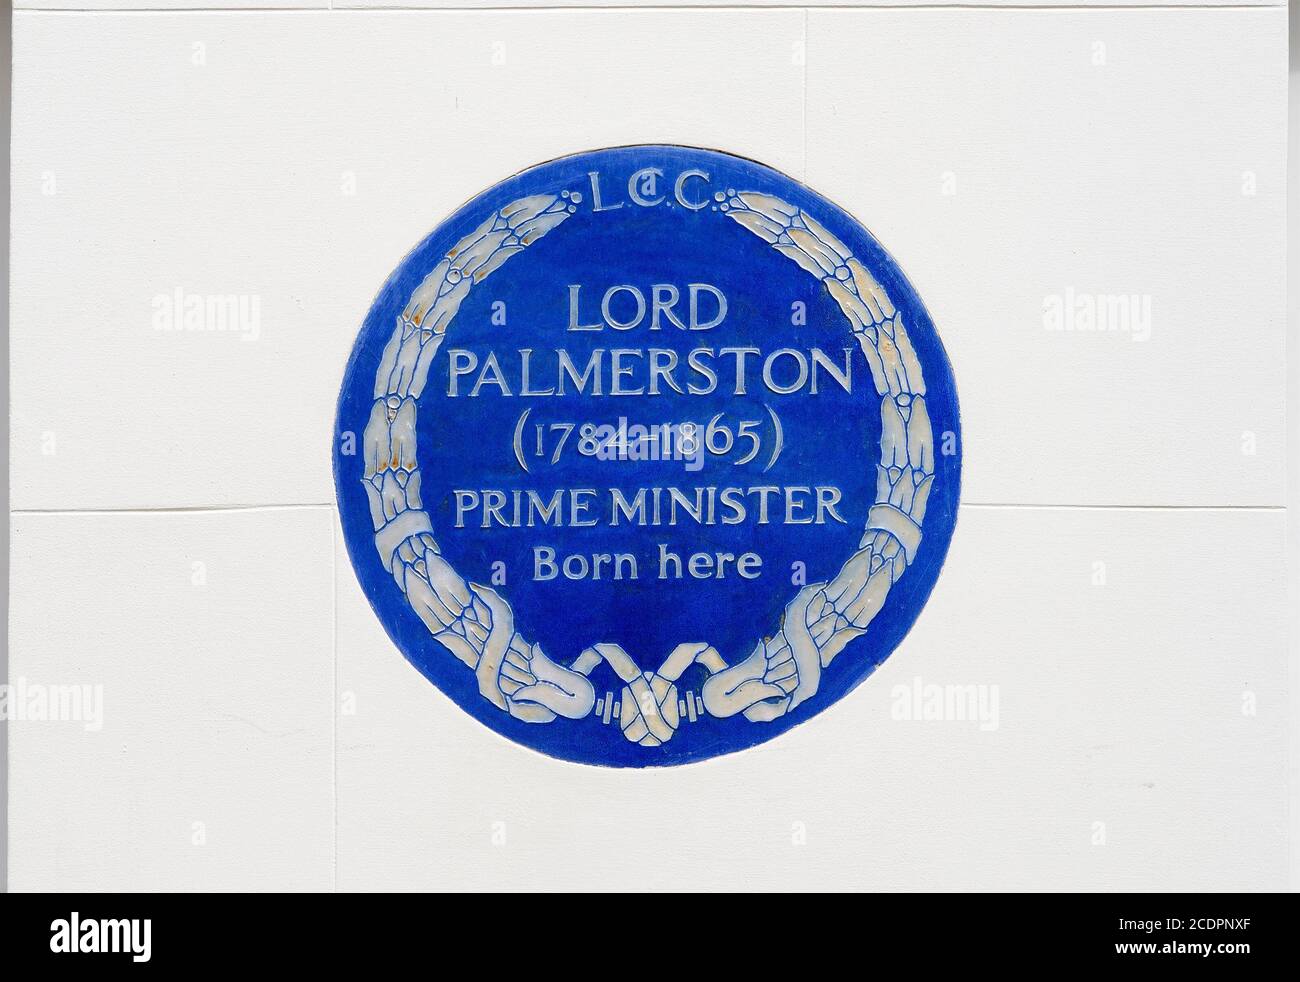 London, England, UK. Commemorative blue plaque: 'Lord Palmerston (1784-1865) Prime Minister Born here' at 20 Queen Anne's Gate Stock Photo